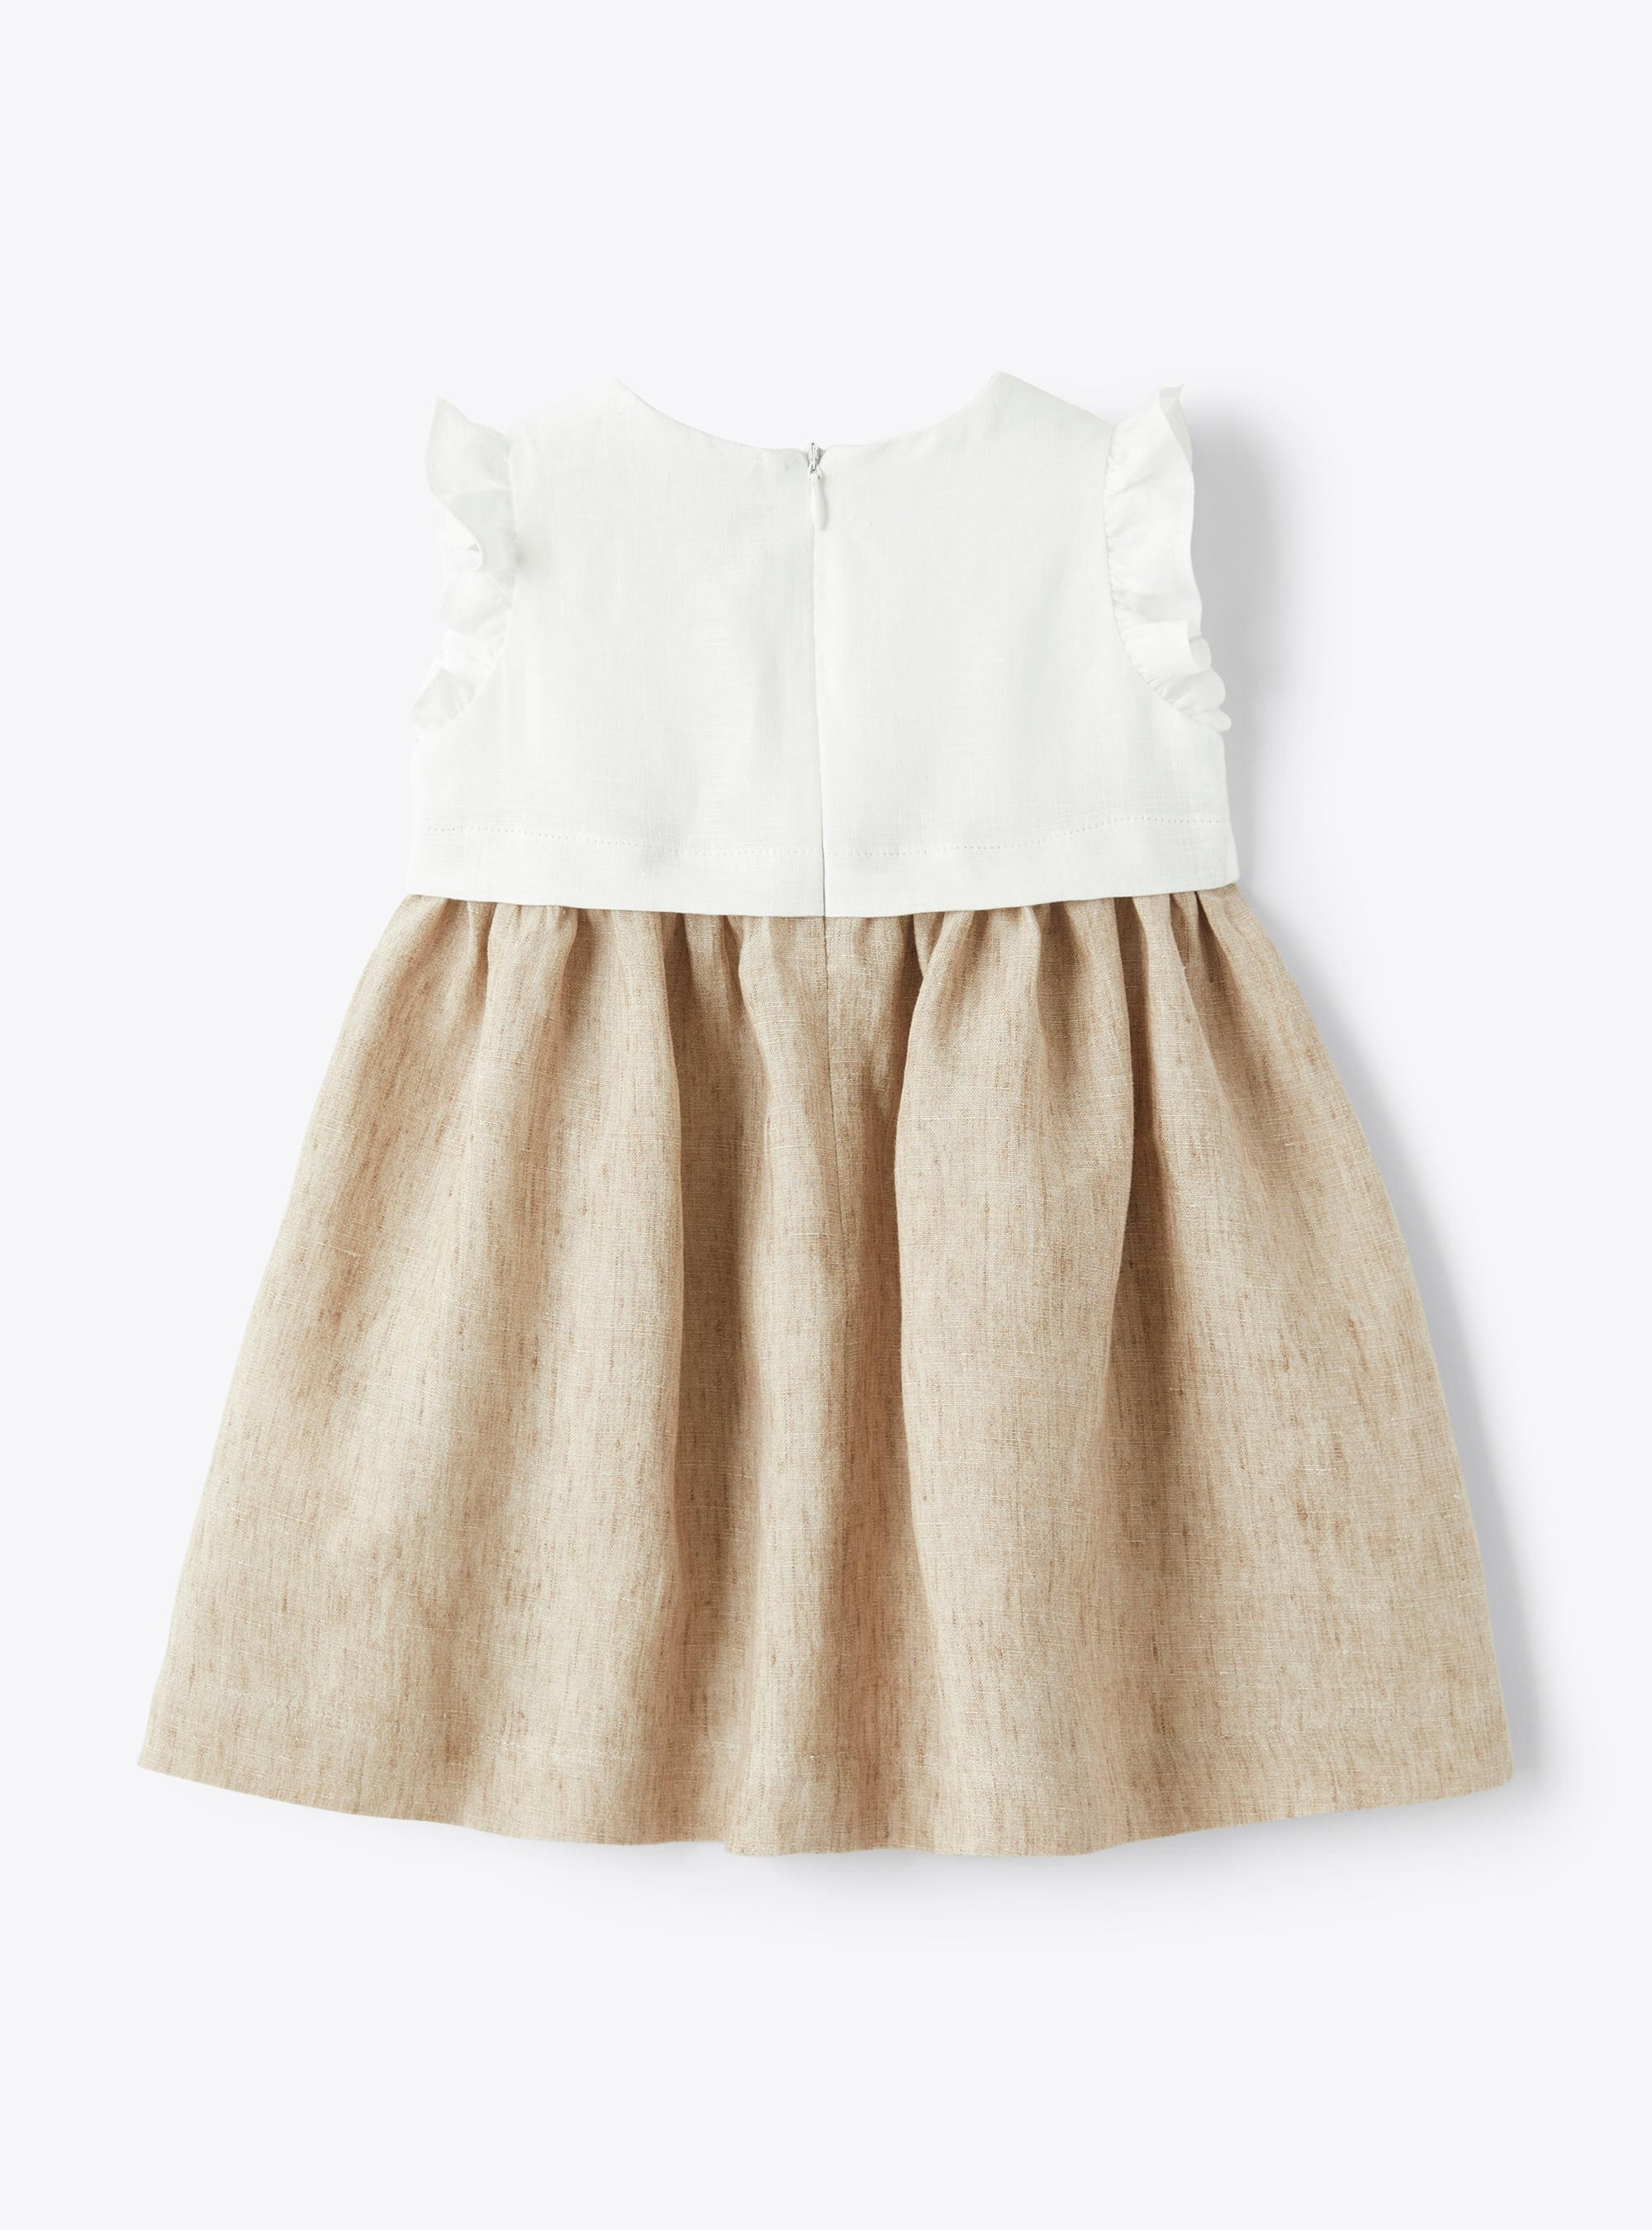 Dress for baby girls with embroidered floral detailing - White | Il Gufo